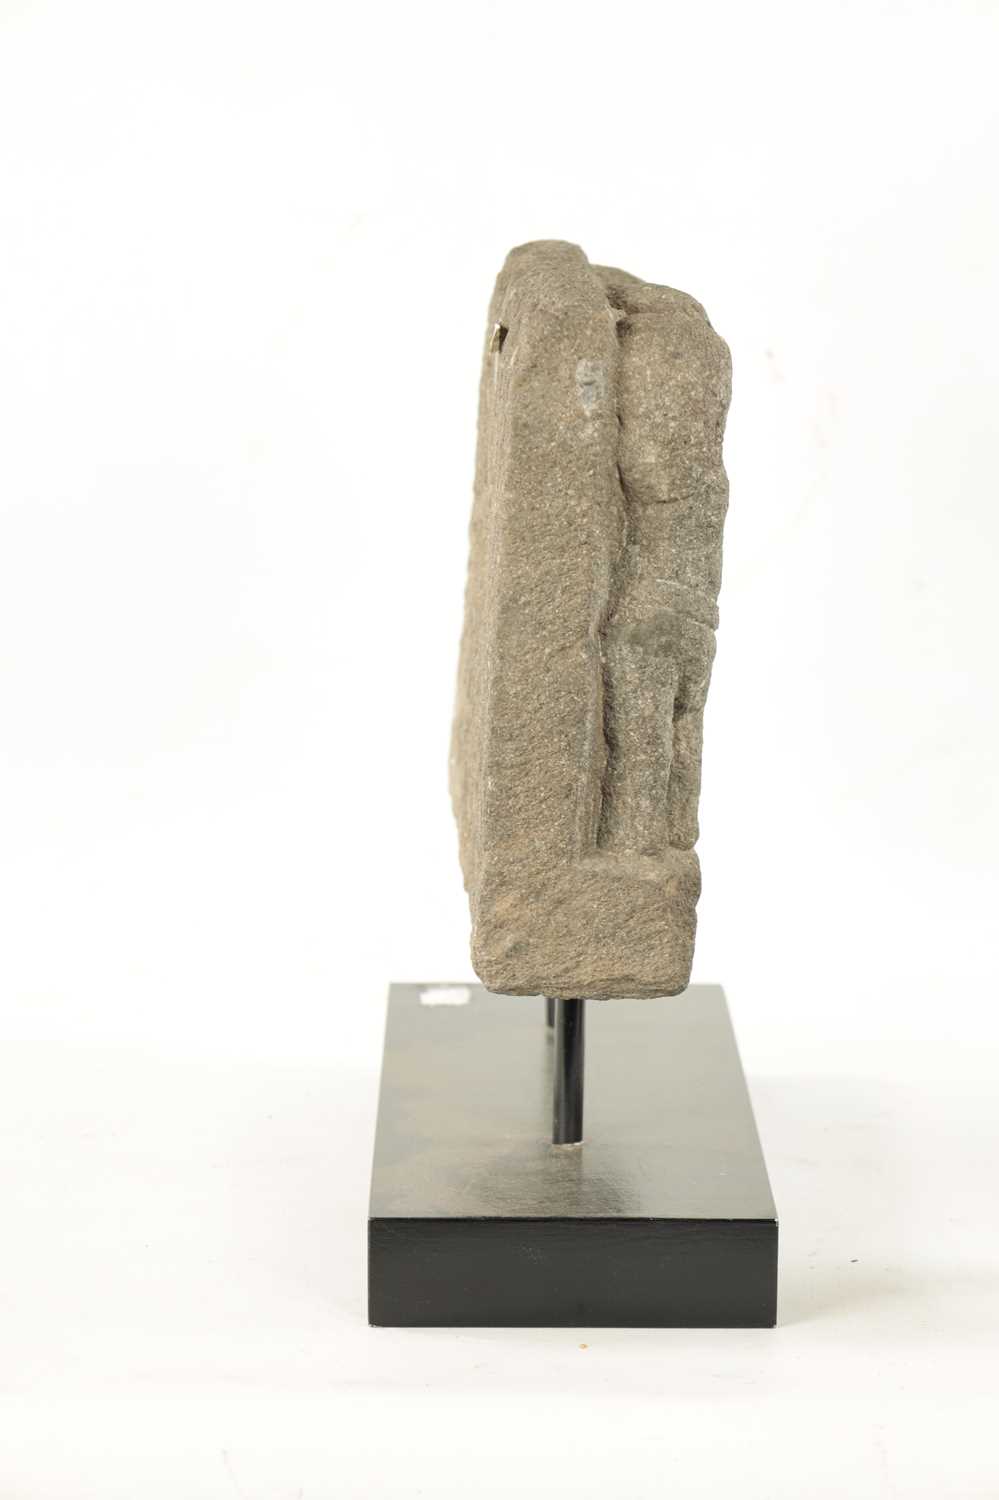 A 13TH 14TH CENTURY EASTERN VOLCANIC STONE FRAGMENT - Image 5 of 7